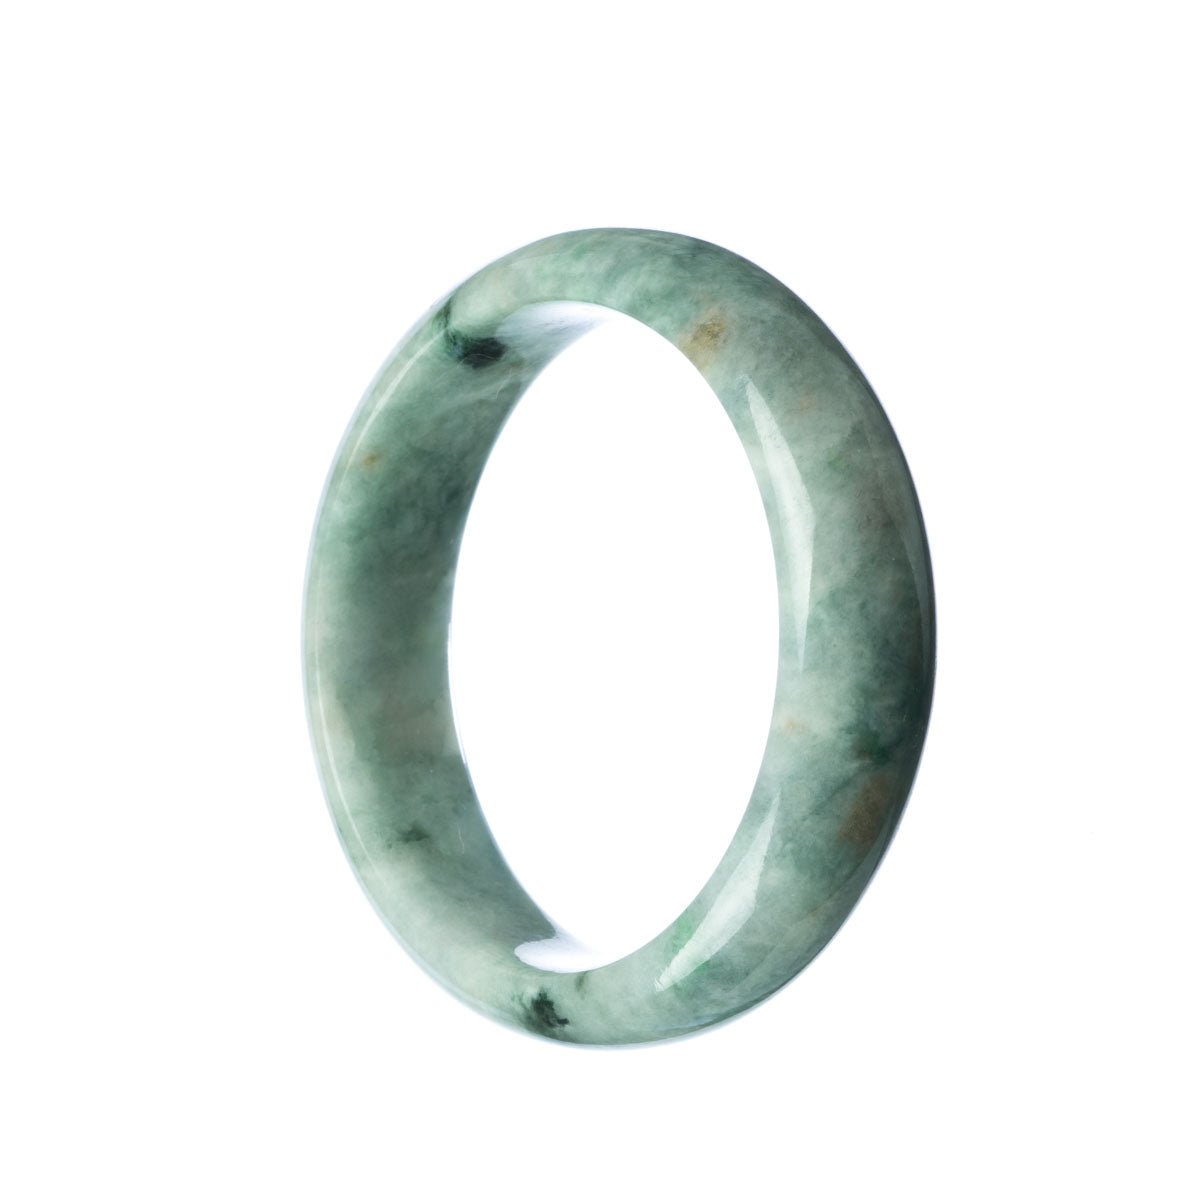 A close-up of a beautiful pale green Burmese jade bangle bracelet with a half moon shape, showcasing its natural and genuine characteristics.